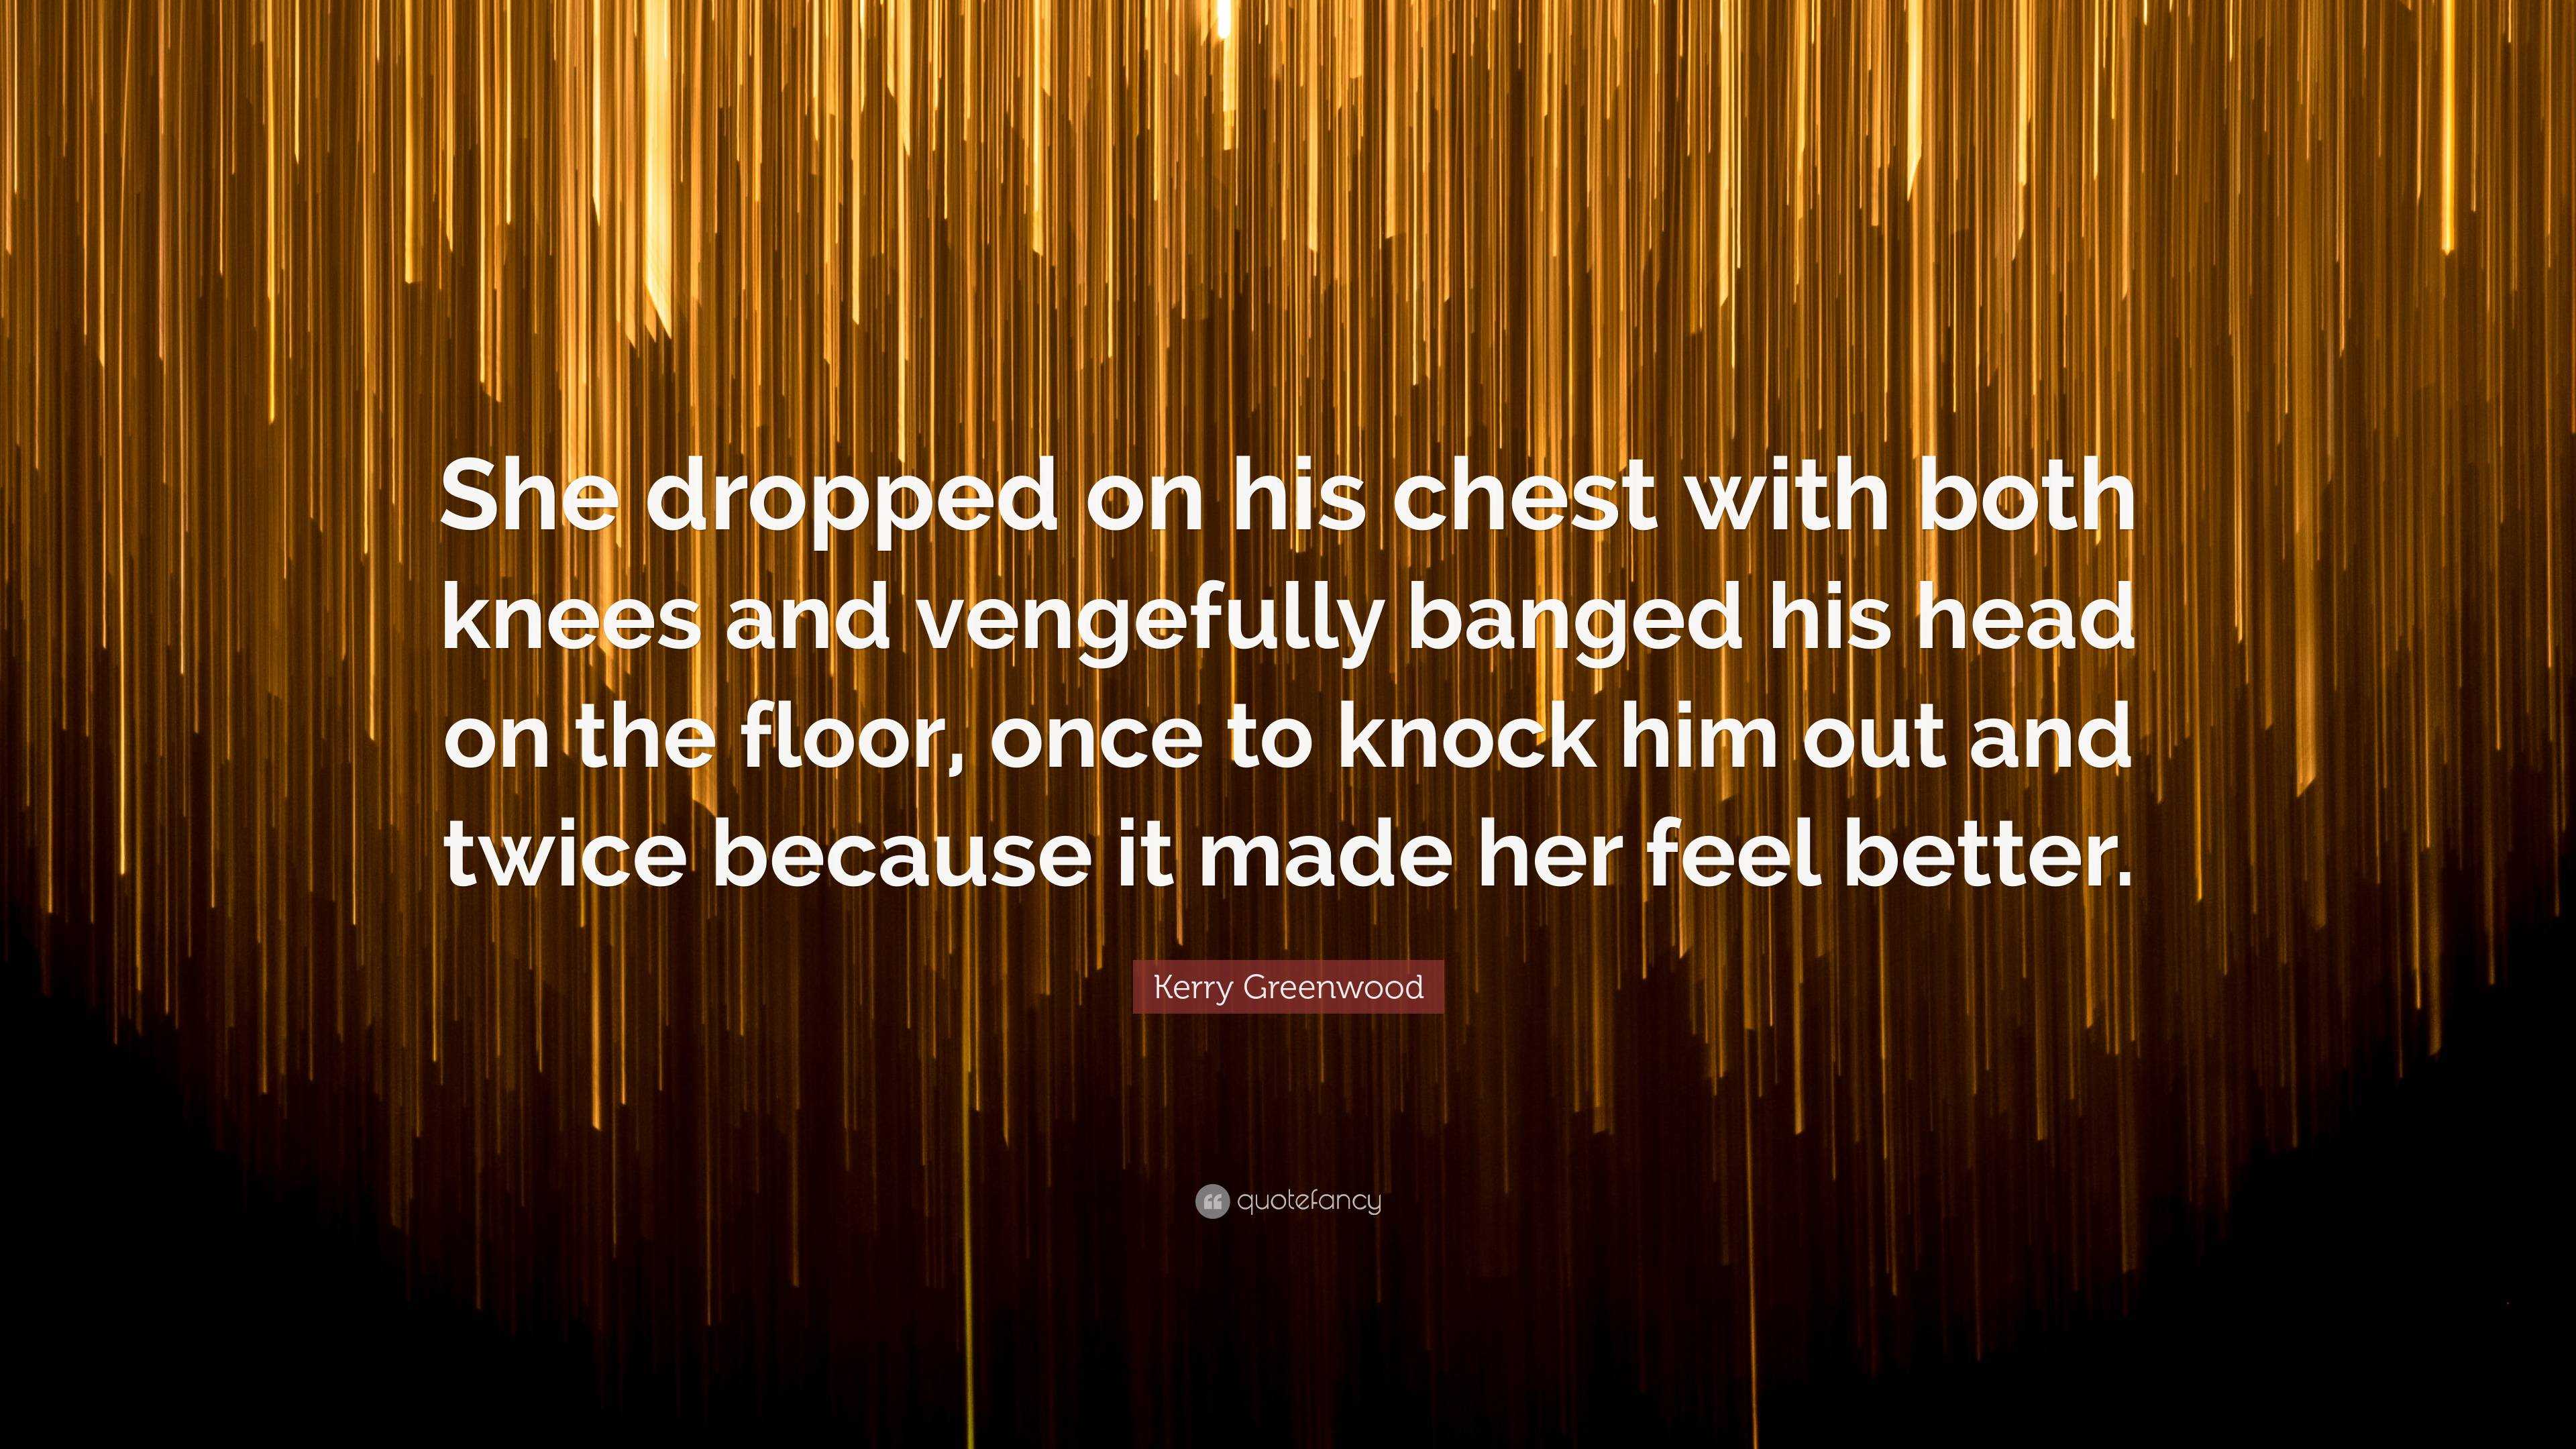 https://quotefancy.com/media/wallpaper/3840x2160/6841563-Kerry-Greenwood-Quote-She-dropped-on-his-chest-with-both-knees-and.jpg